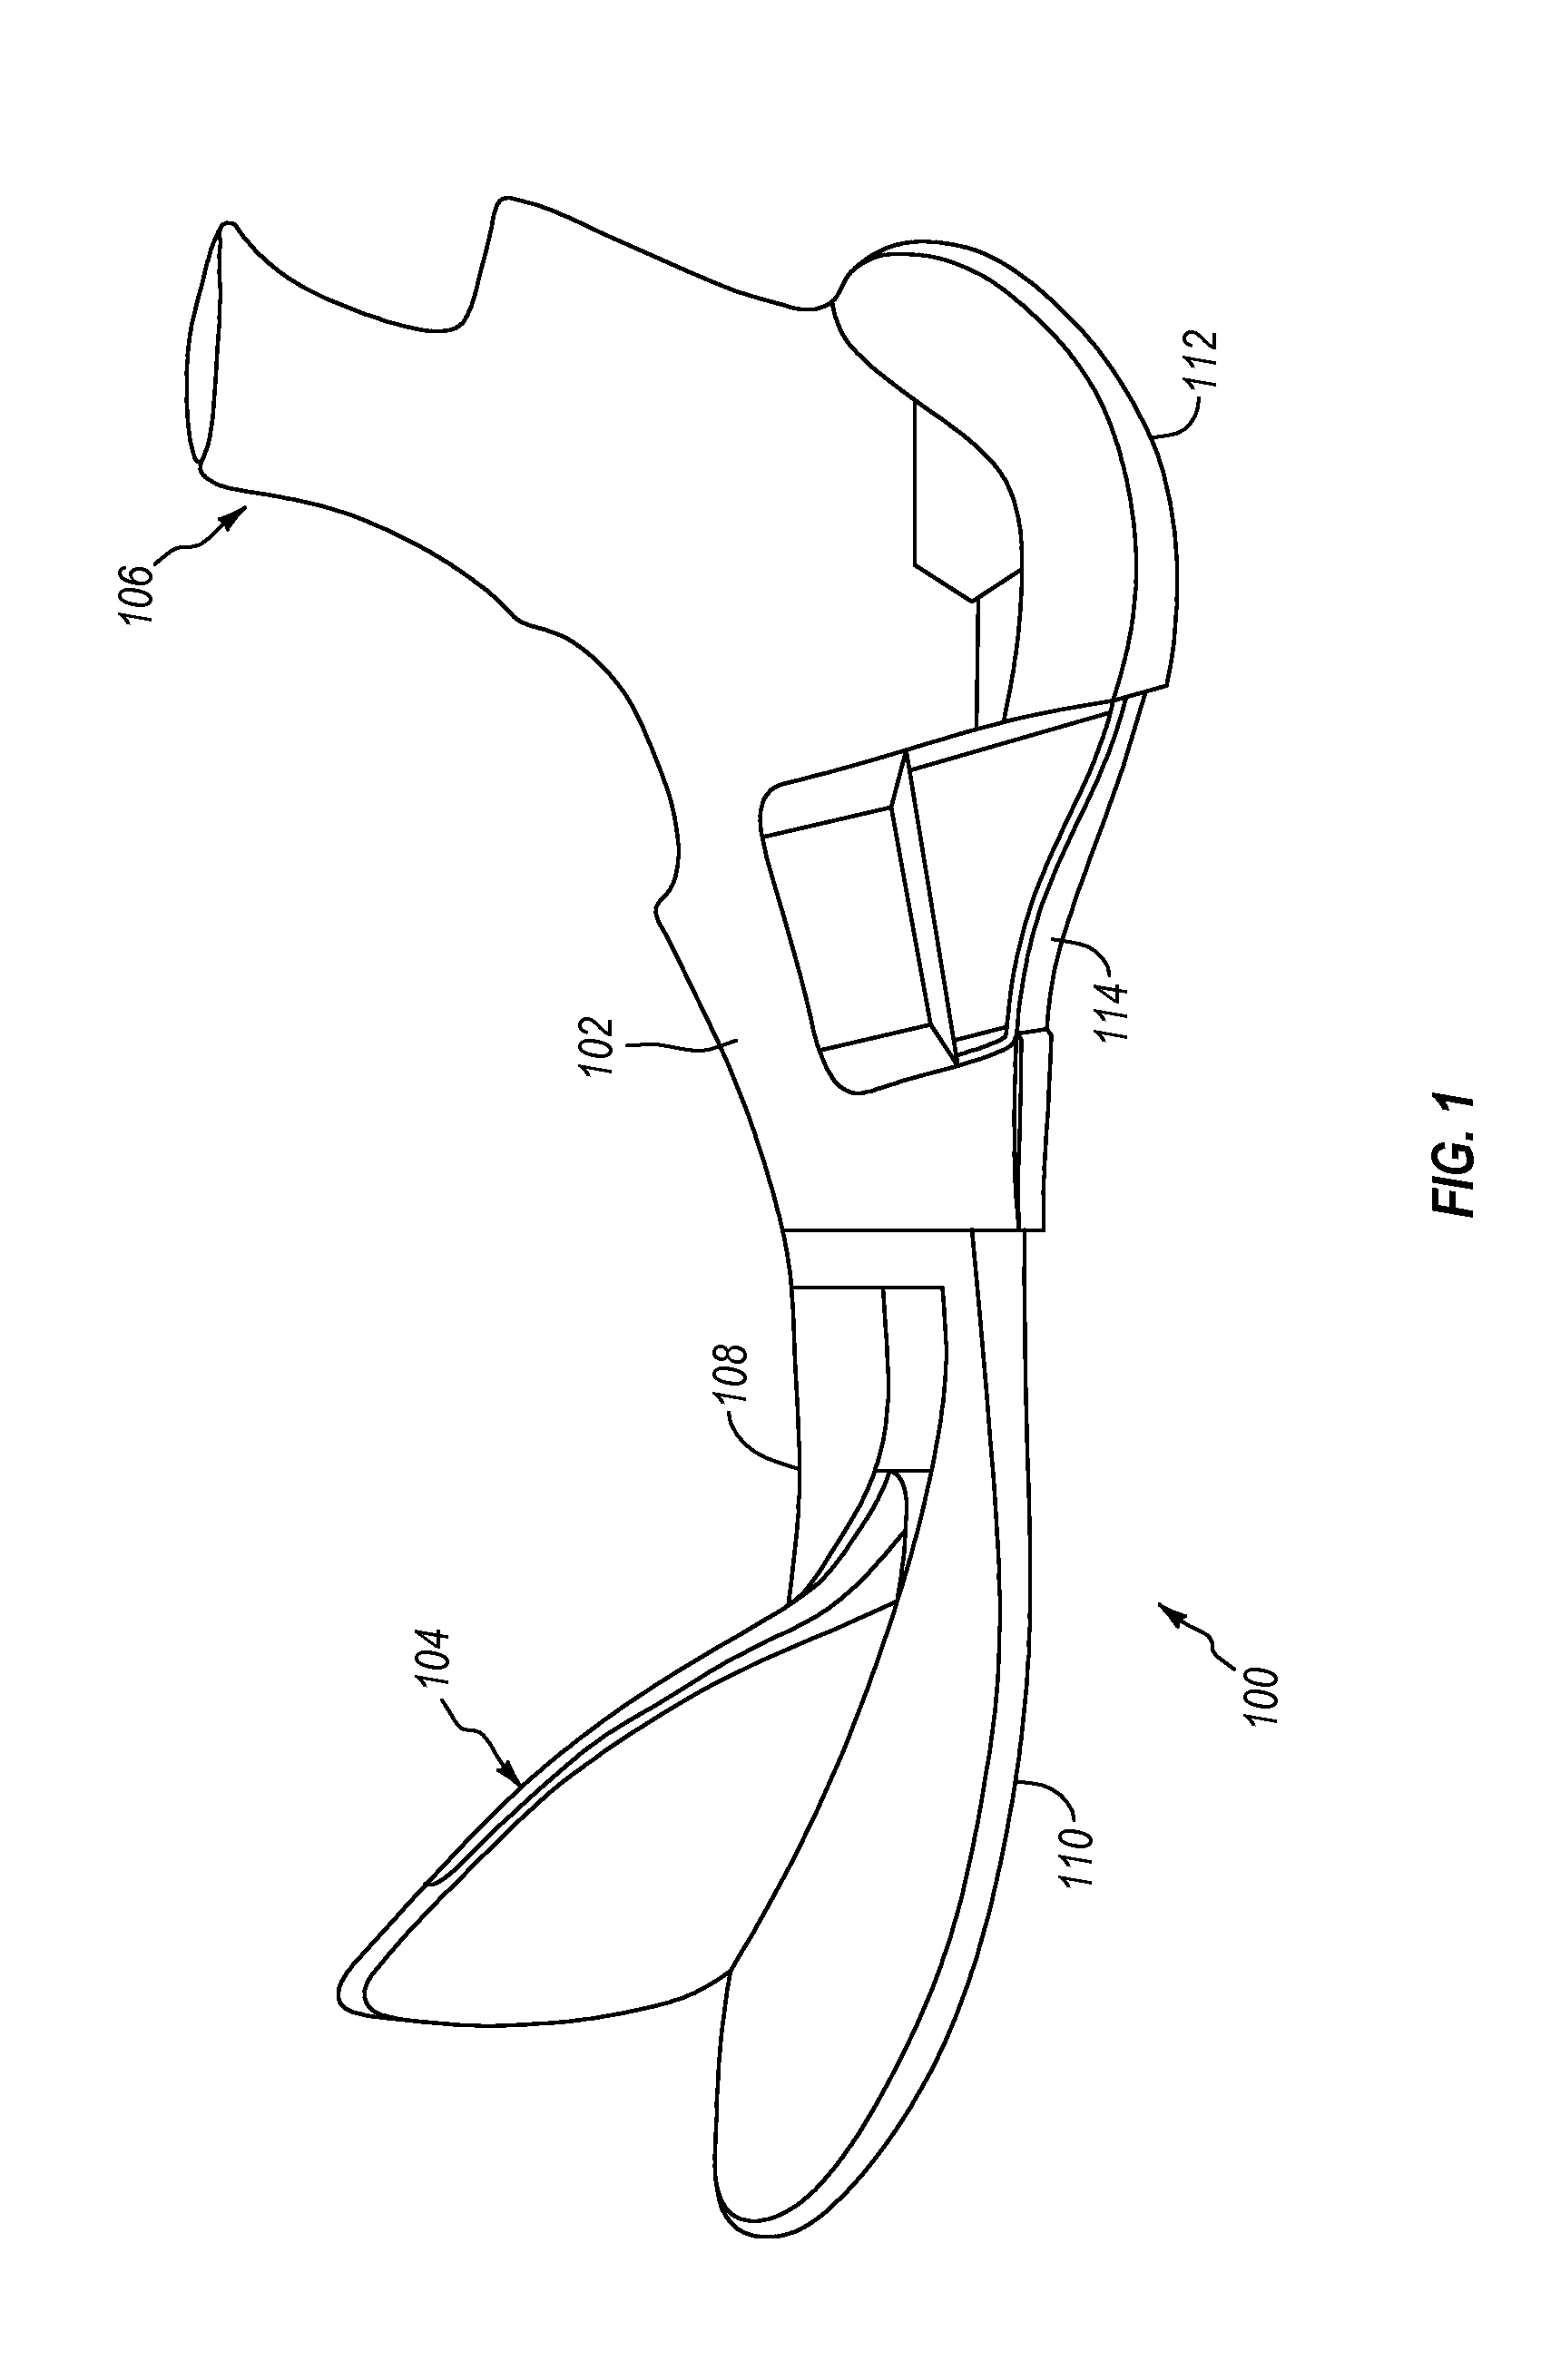 Injection molded saddle with cover